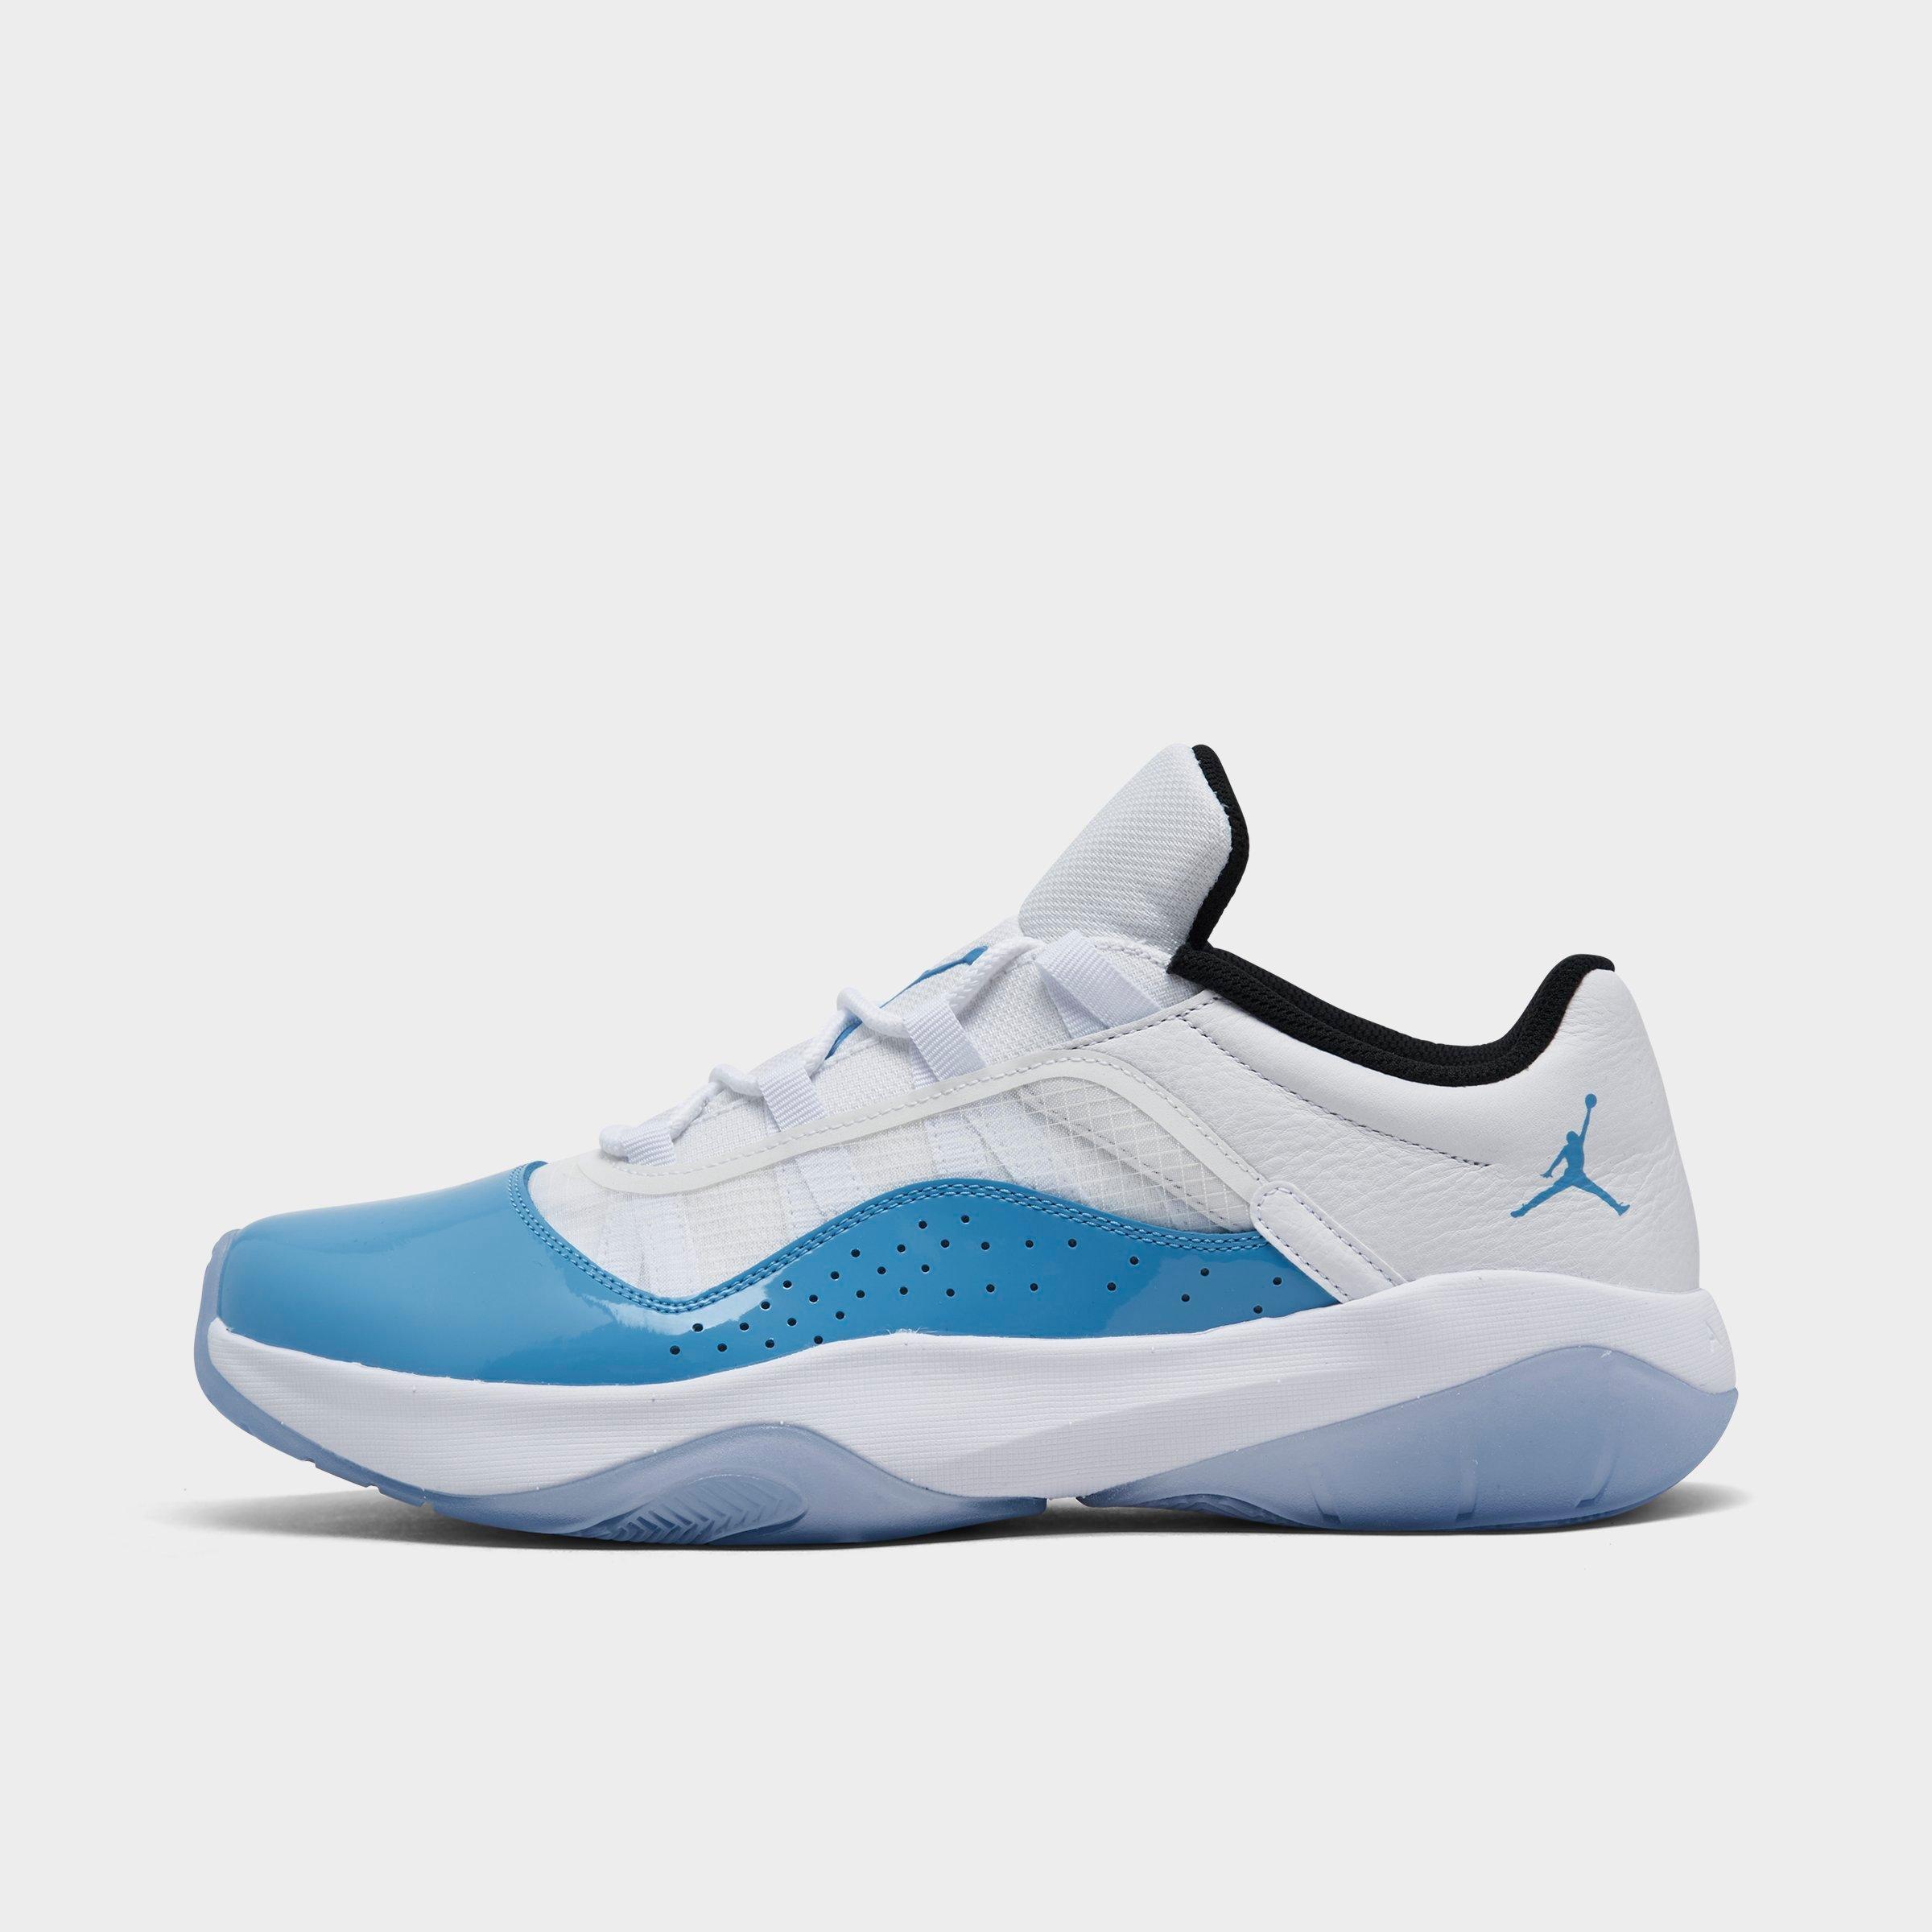 Nike Jordan Air 11 Cmft Low Casual Shoes Size 12.0 Leather In White/university Blue/black